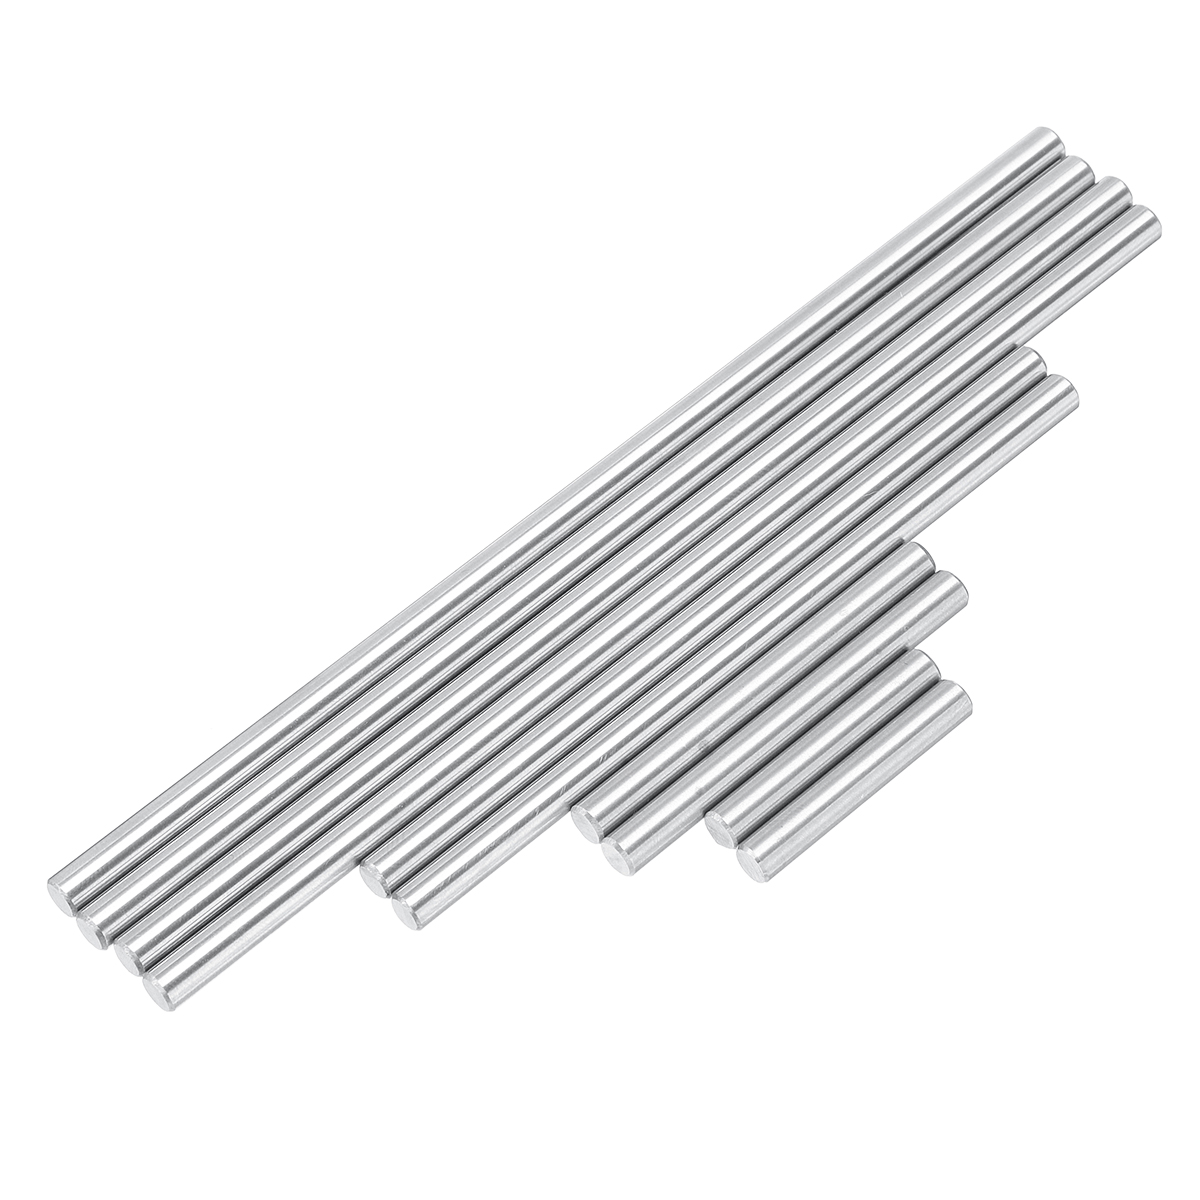 10pcs-52mm-Ejector-Pins-Set-32-152cm-Push-Rifling-Button-Ejector-Pins-for-Machine-Reamer-1311536-8